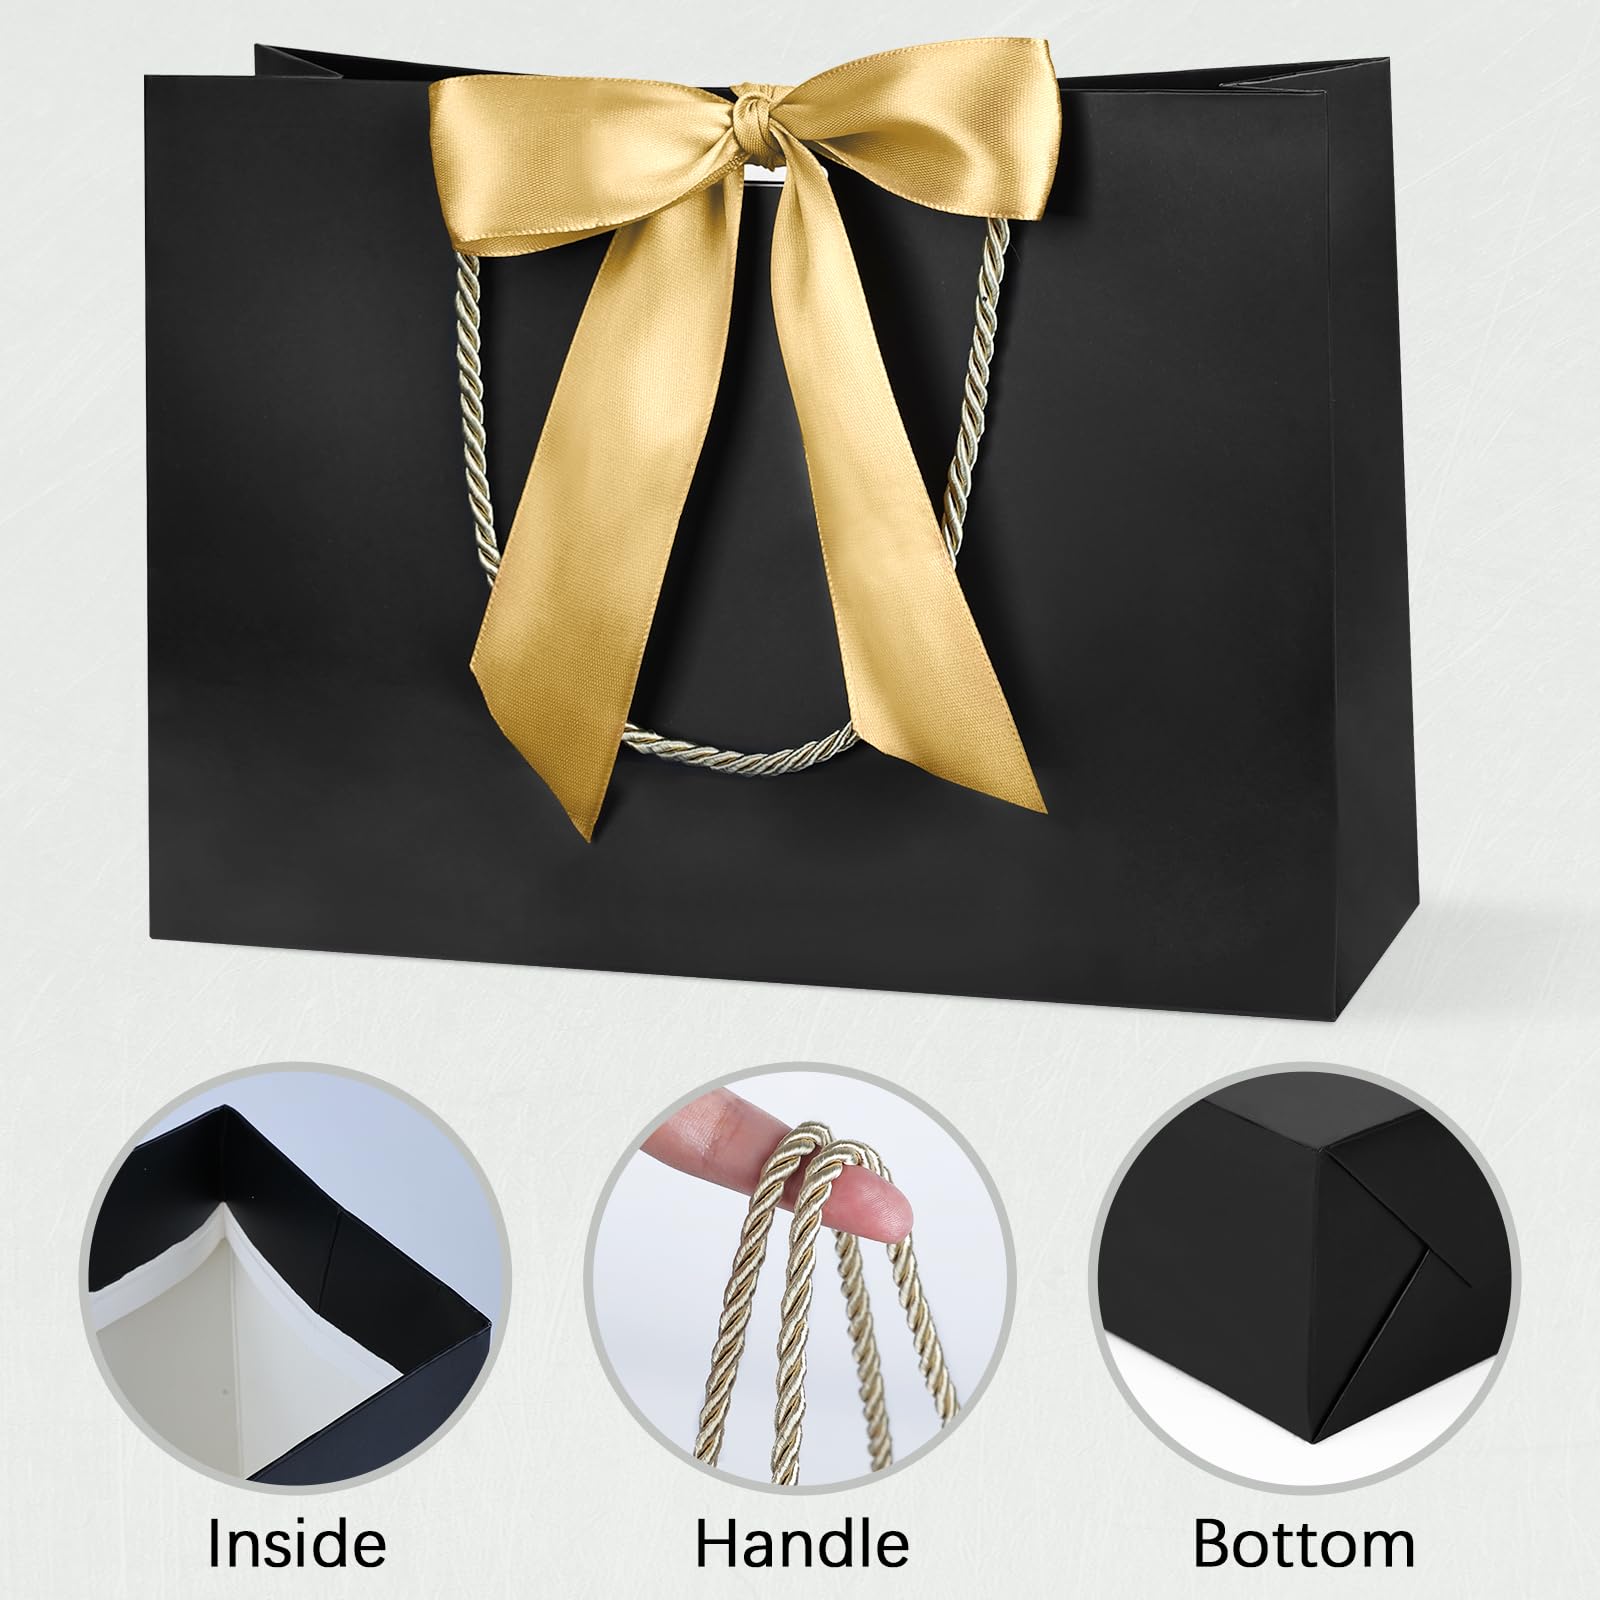 Gift Bags, 2Pcs Paper Gift Bag with 4 Tissue Papers and 2 Cards, Present Bags with Handles for Women Girls Bridesmaid Birthday Valentines Wedding Party, Black